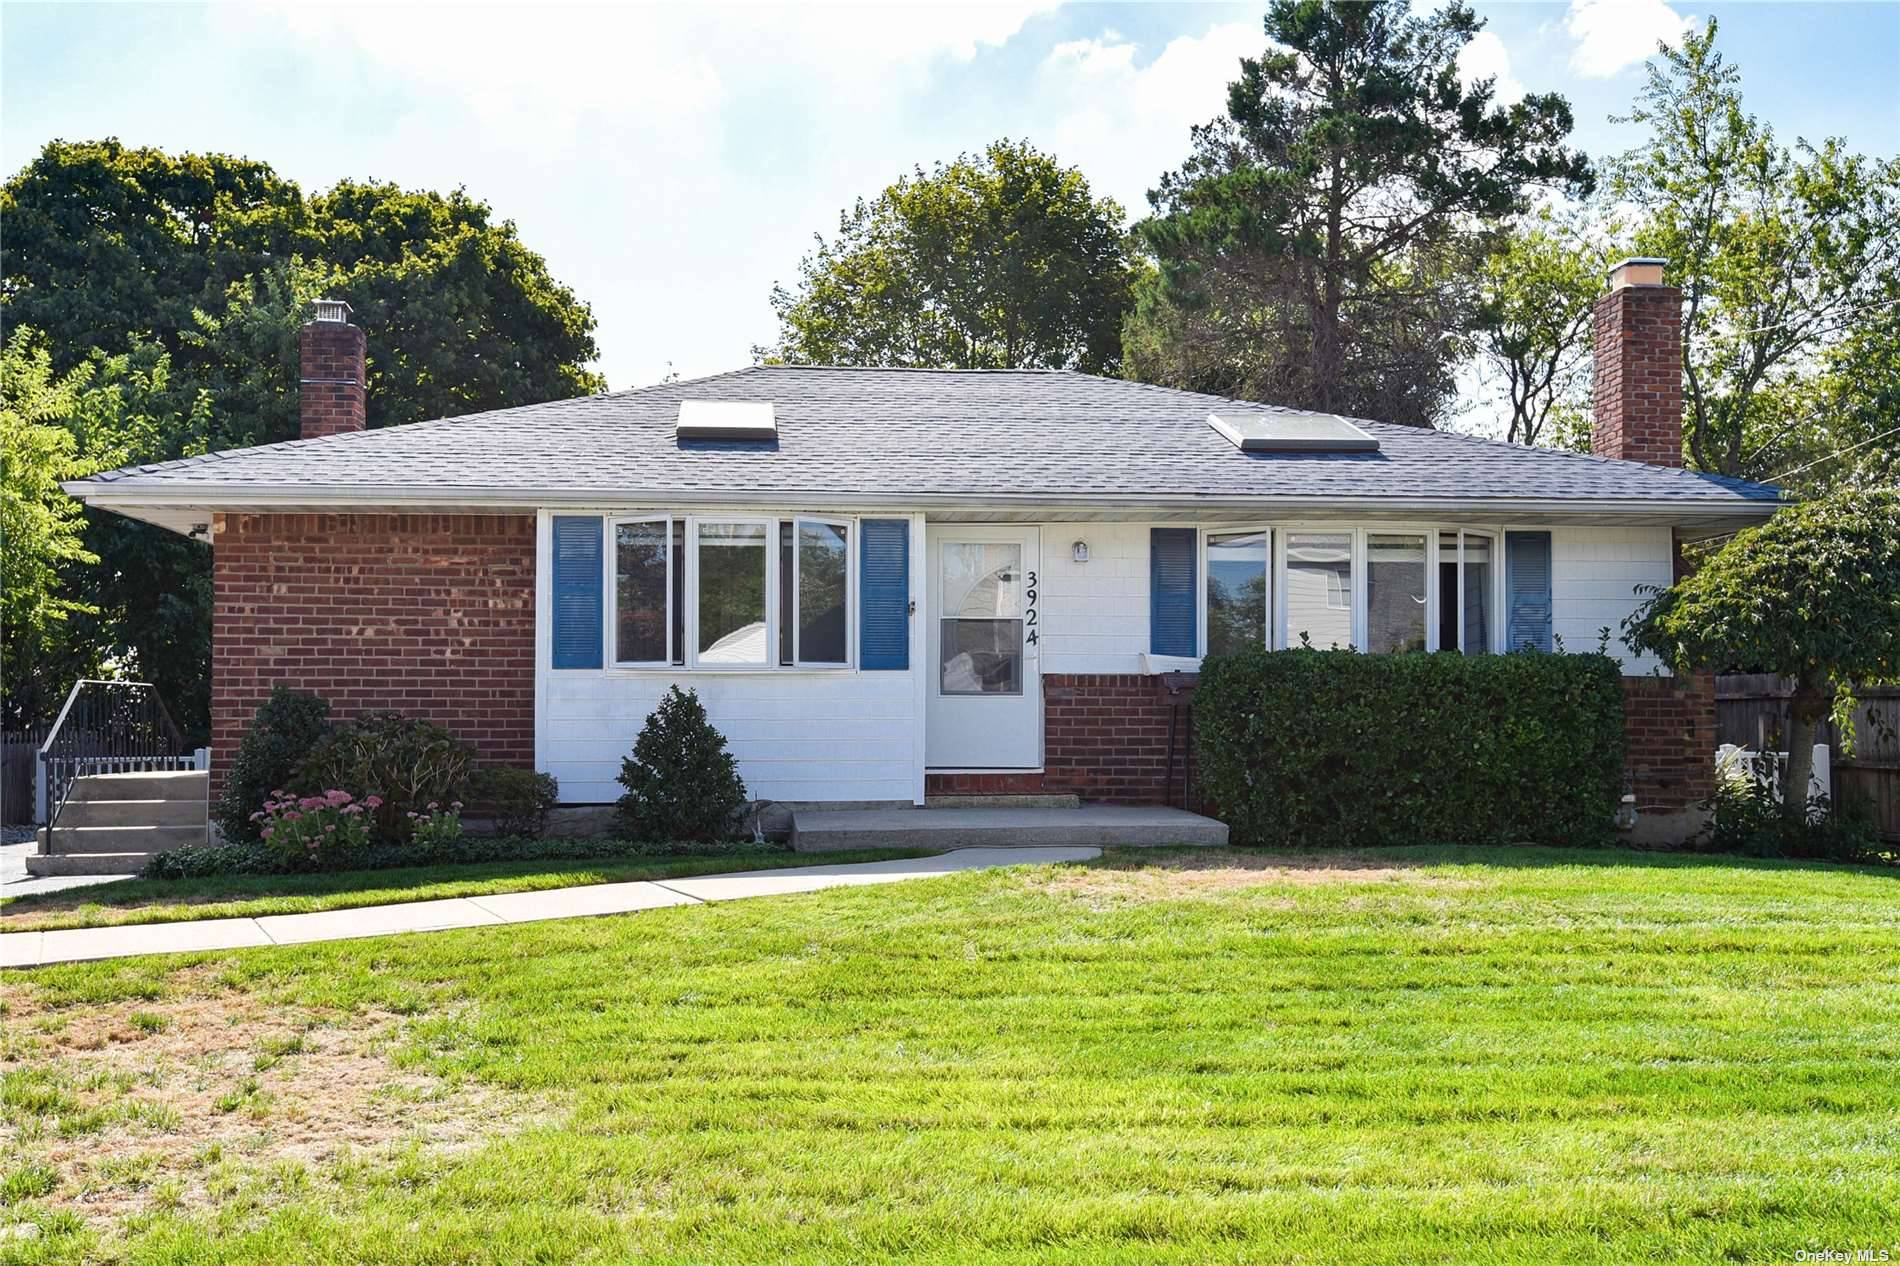 Great midblock location in the heart of Levittown.